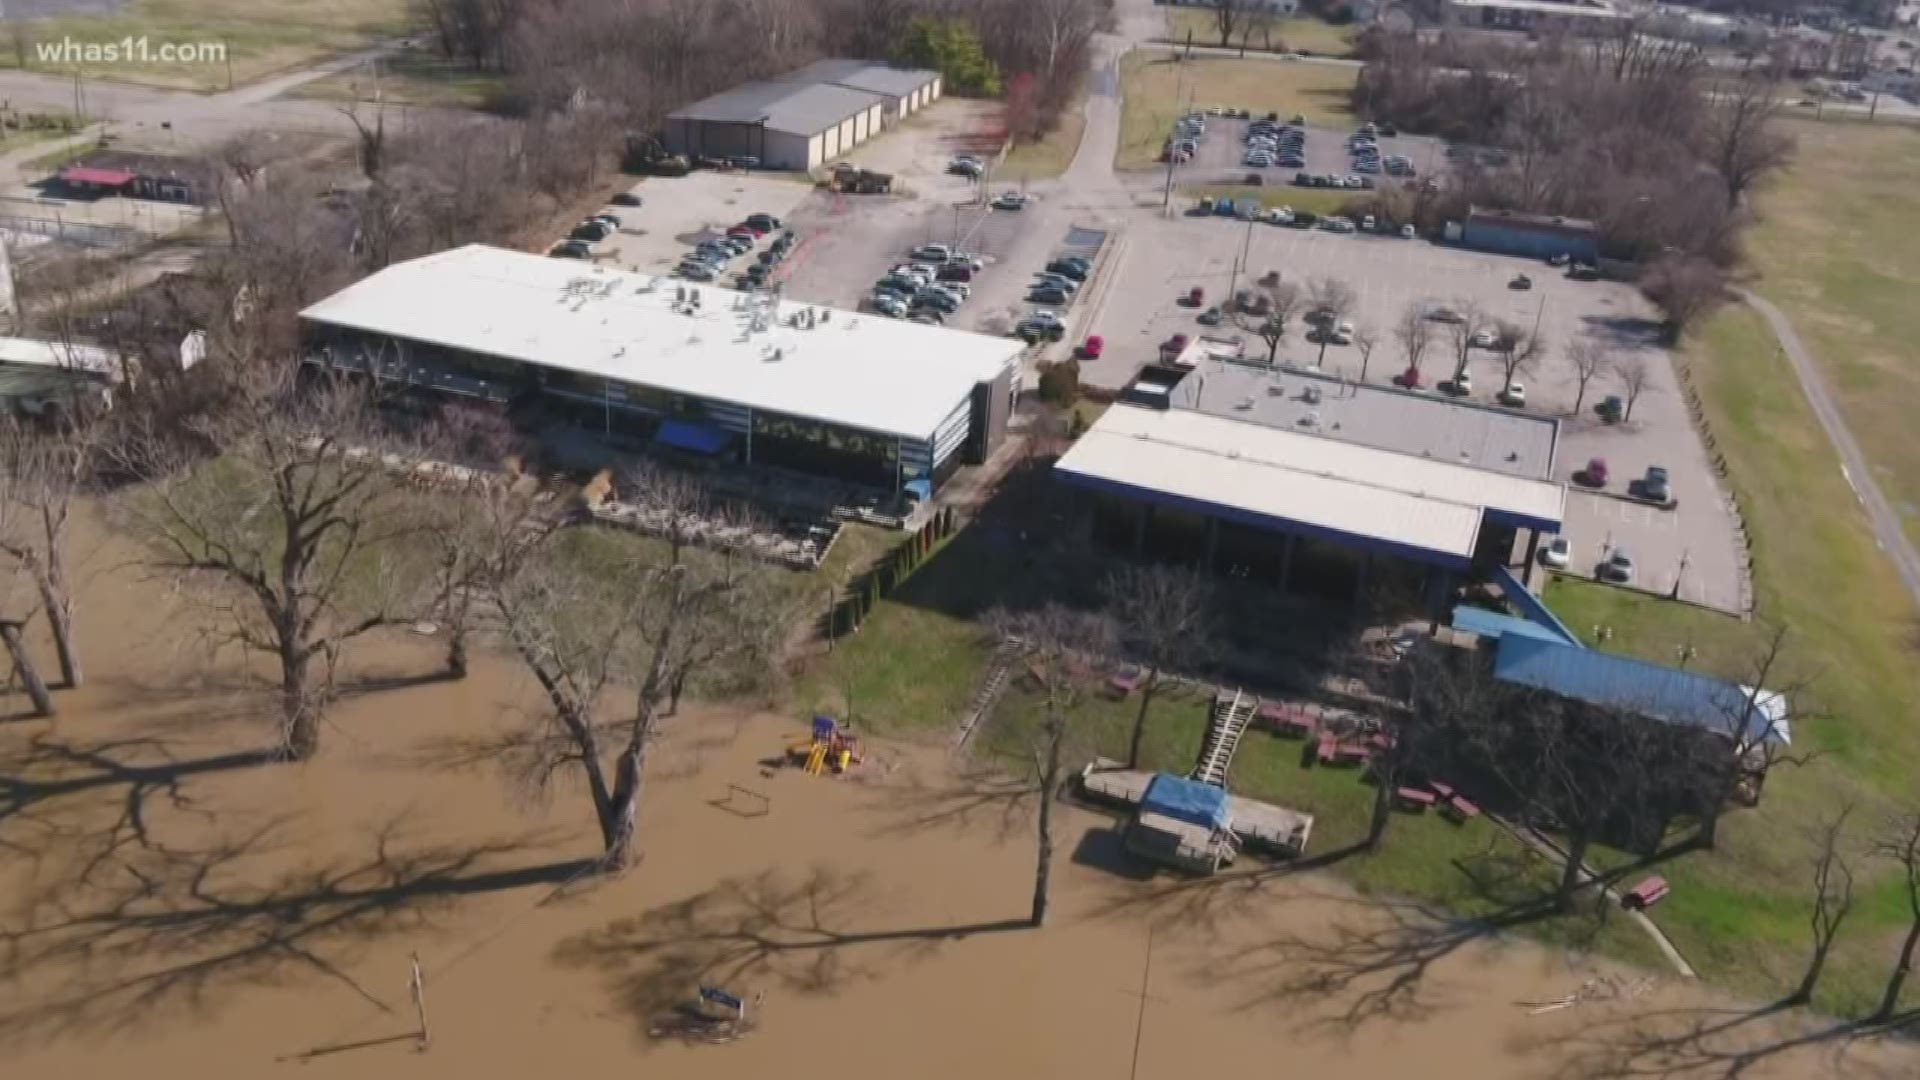 Some restaurants had to close in 2019 after flooding prevented people from getting to the businesses.